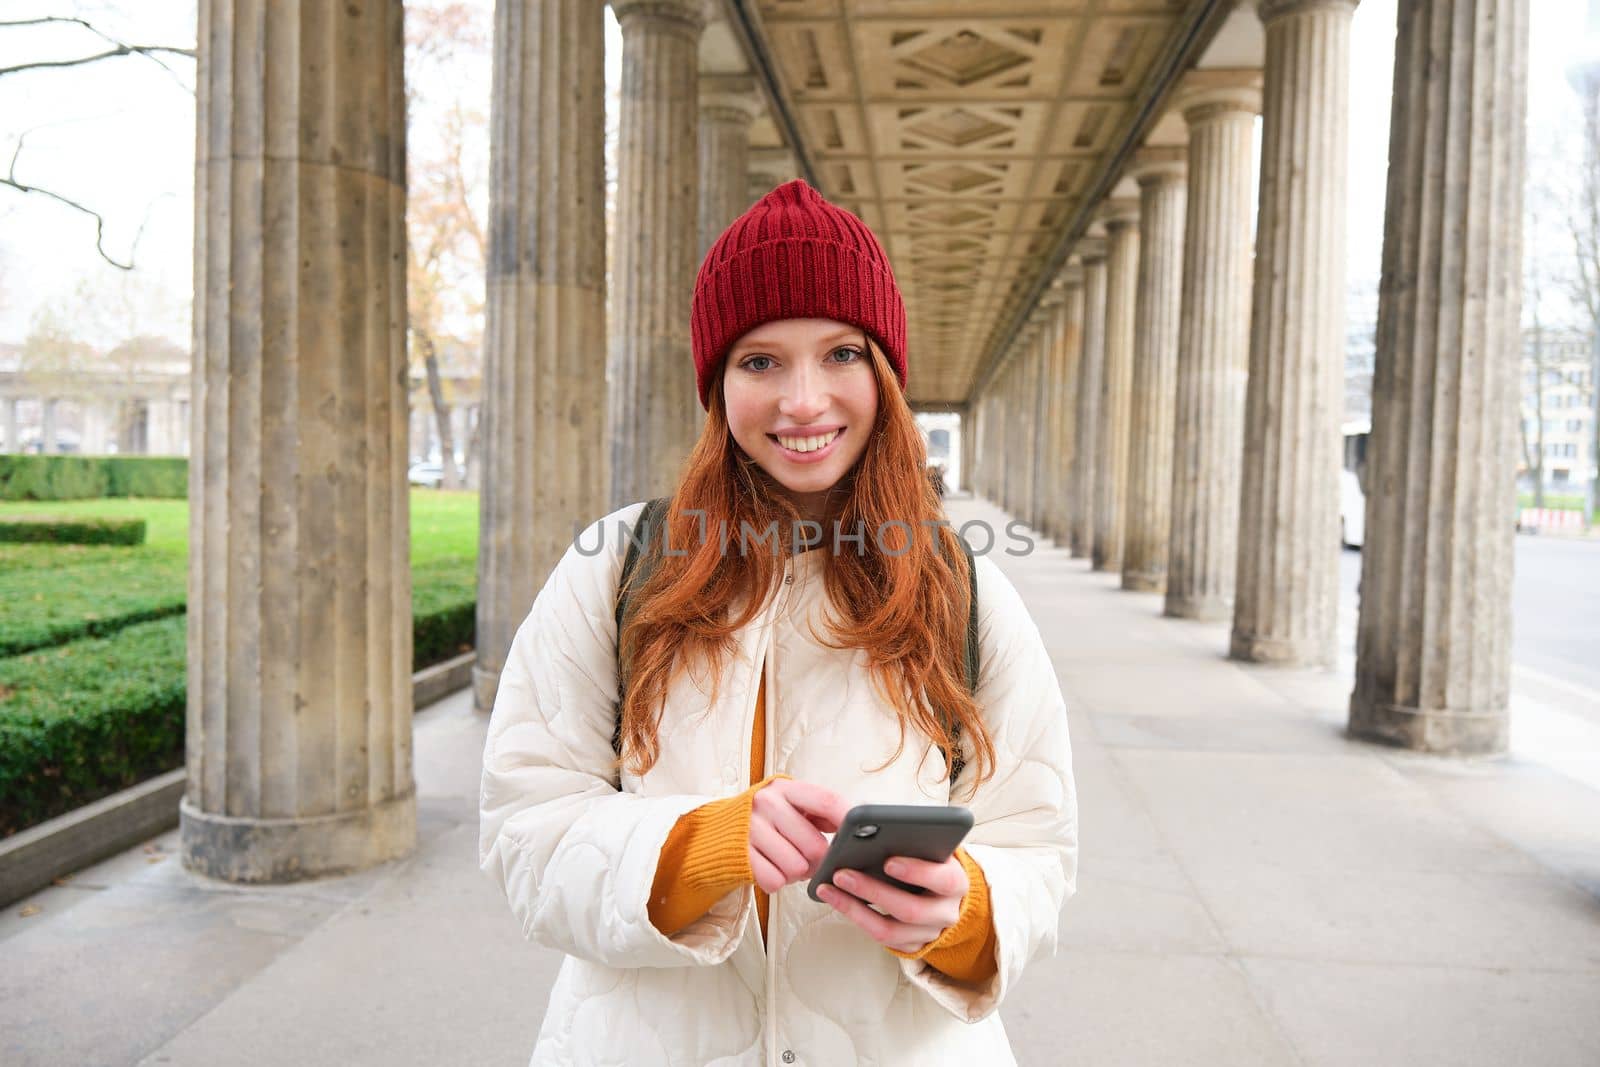 Mobile broadband and people. Smiling redhead 20s girl with backpack, uses smartphone on street, holds mobile phone and looks at application.